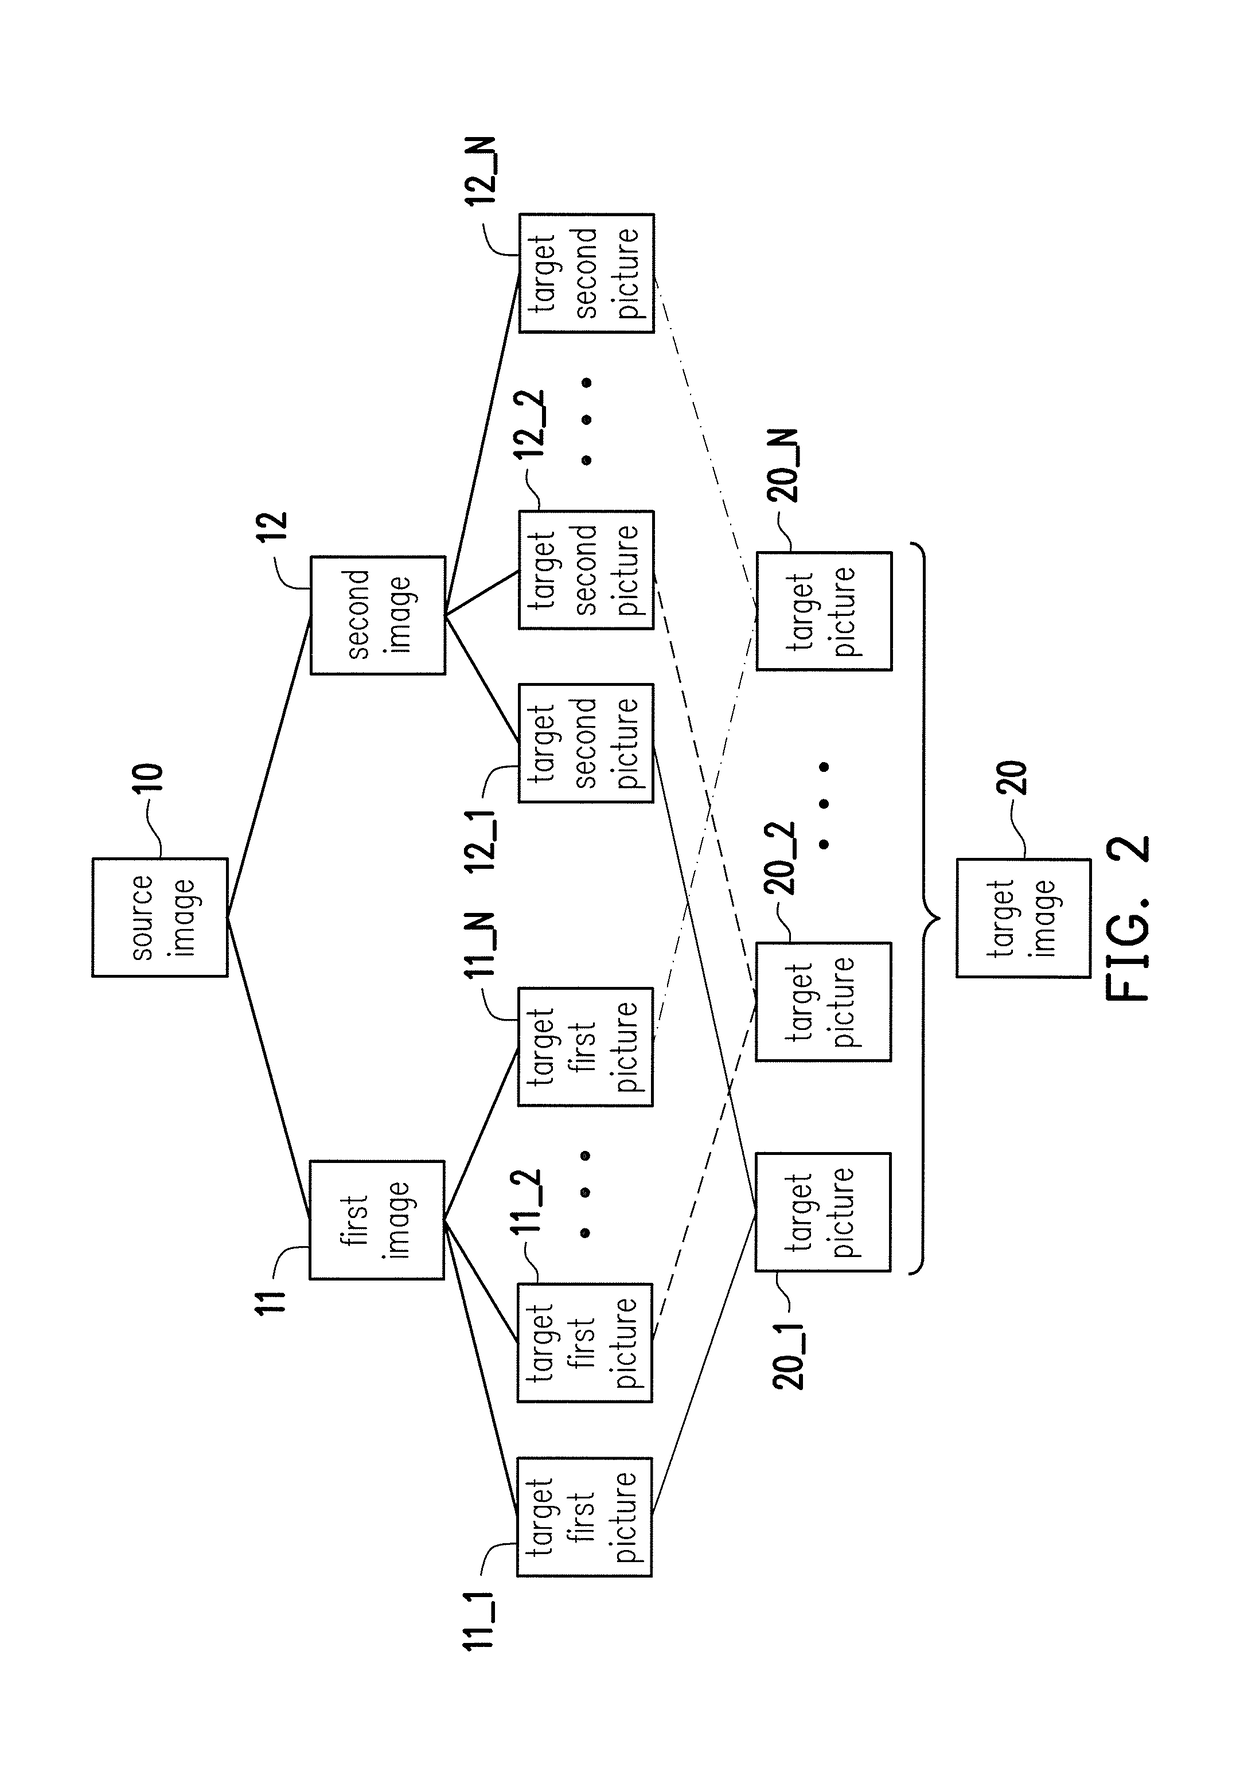 Method and apparatus for processing source image to generate target image